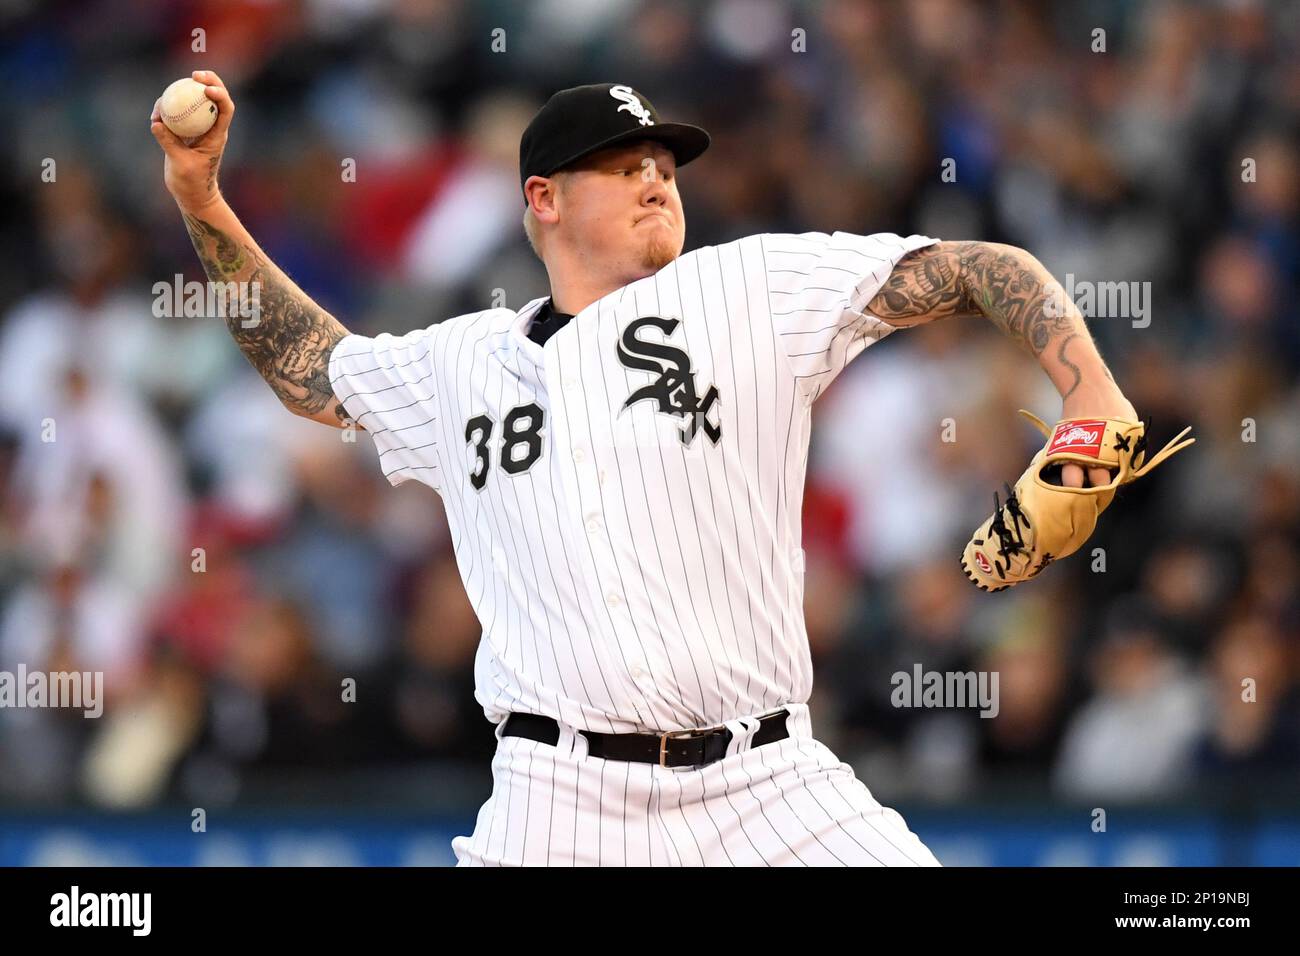 07 June 2016: Chicago White Sox Starting pitcher Mat Latos (38) [7517]  pitches during a game between the Washington Nationals and the Chicago  White Sox at US Cellular Field in Chicago, IL. (